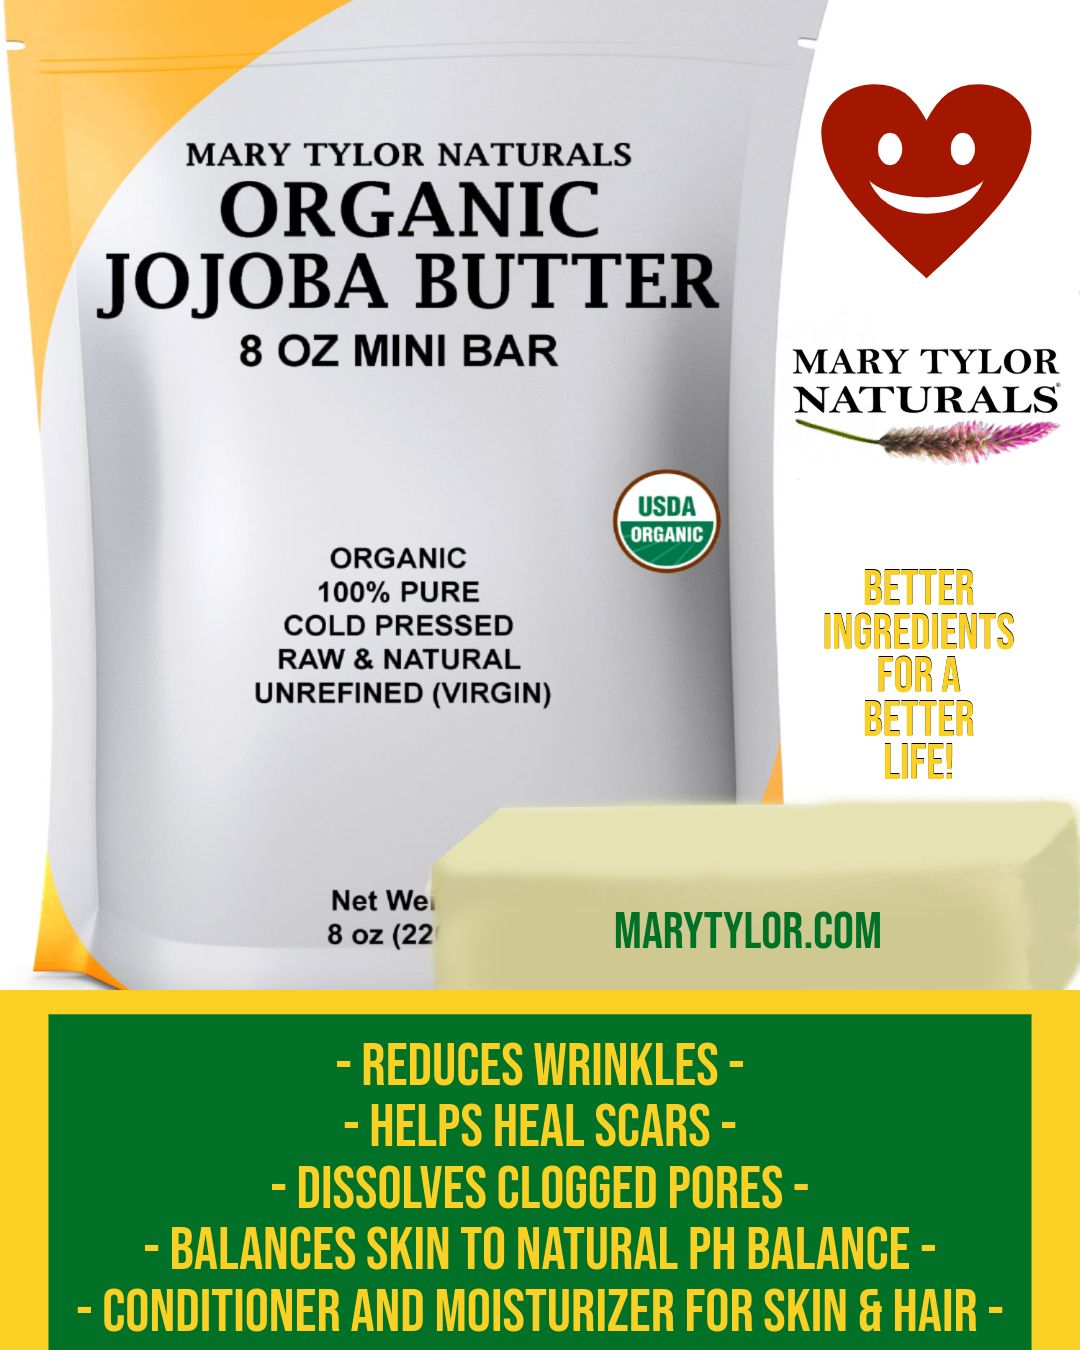 Organic Jojoba Butter - What is it? How is it Pronounced? & How can it help your family...